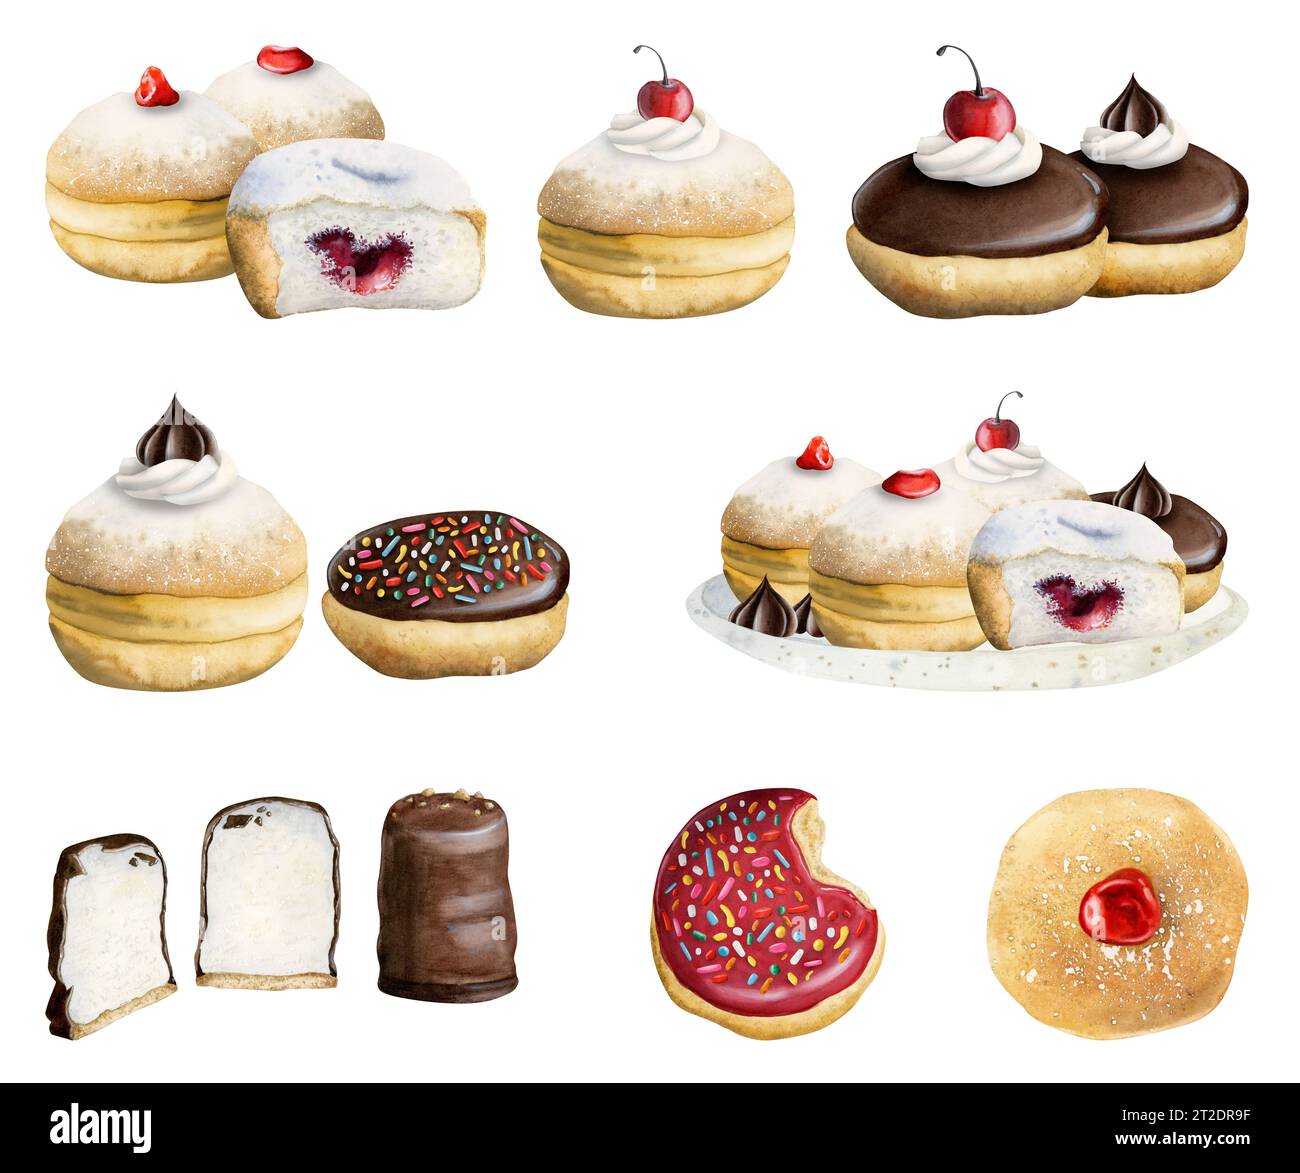 Hanukkah desserts and donuts set with strawberry and chocolate. Delicious hand drawn sufganiyot illustrations Stock Photo